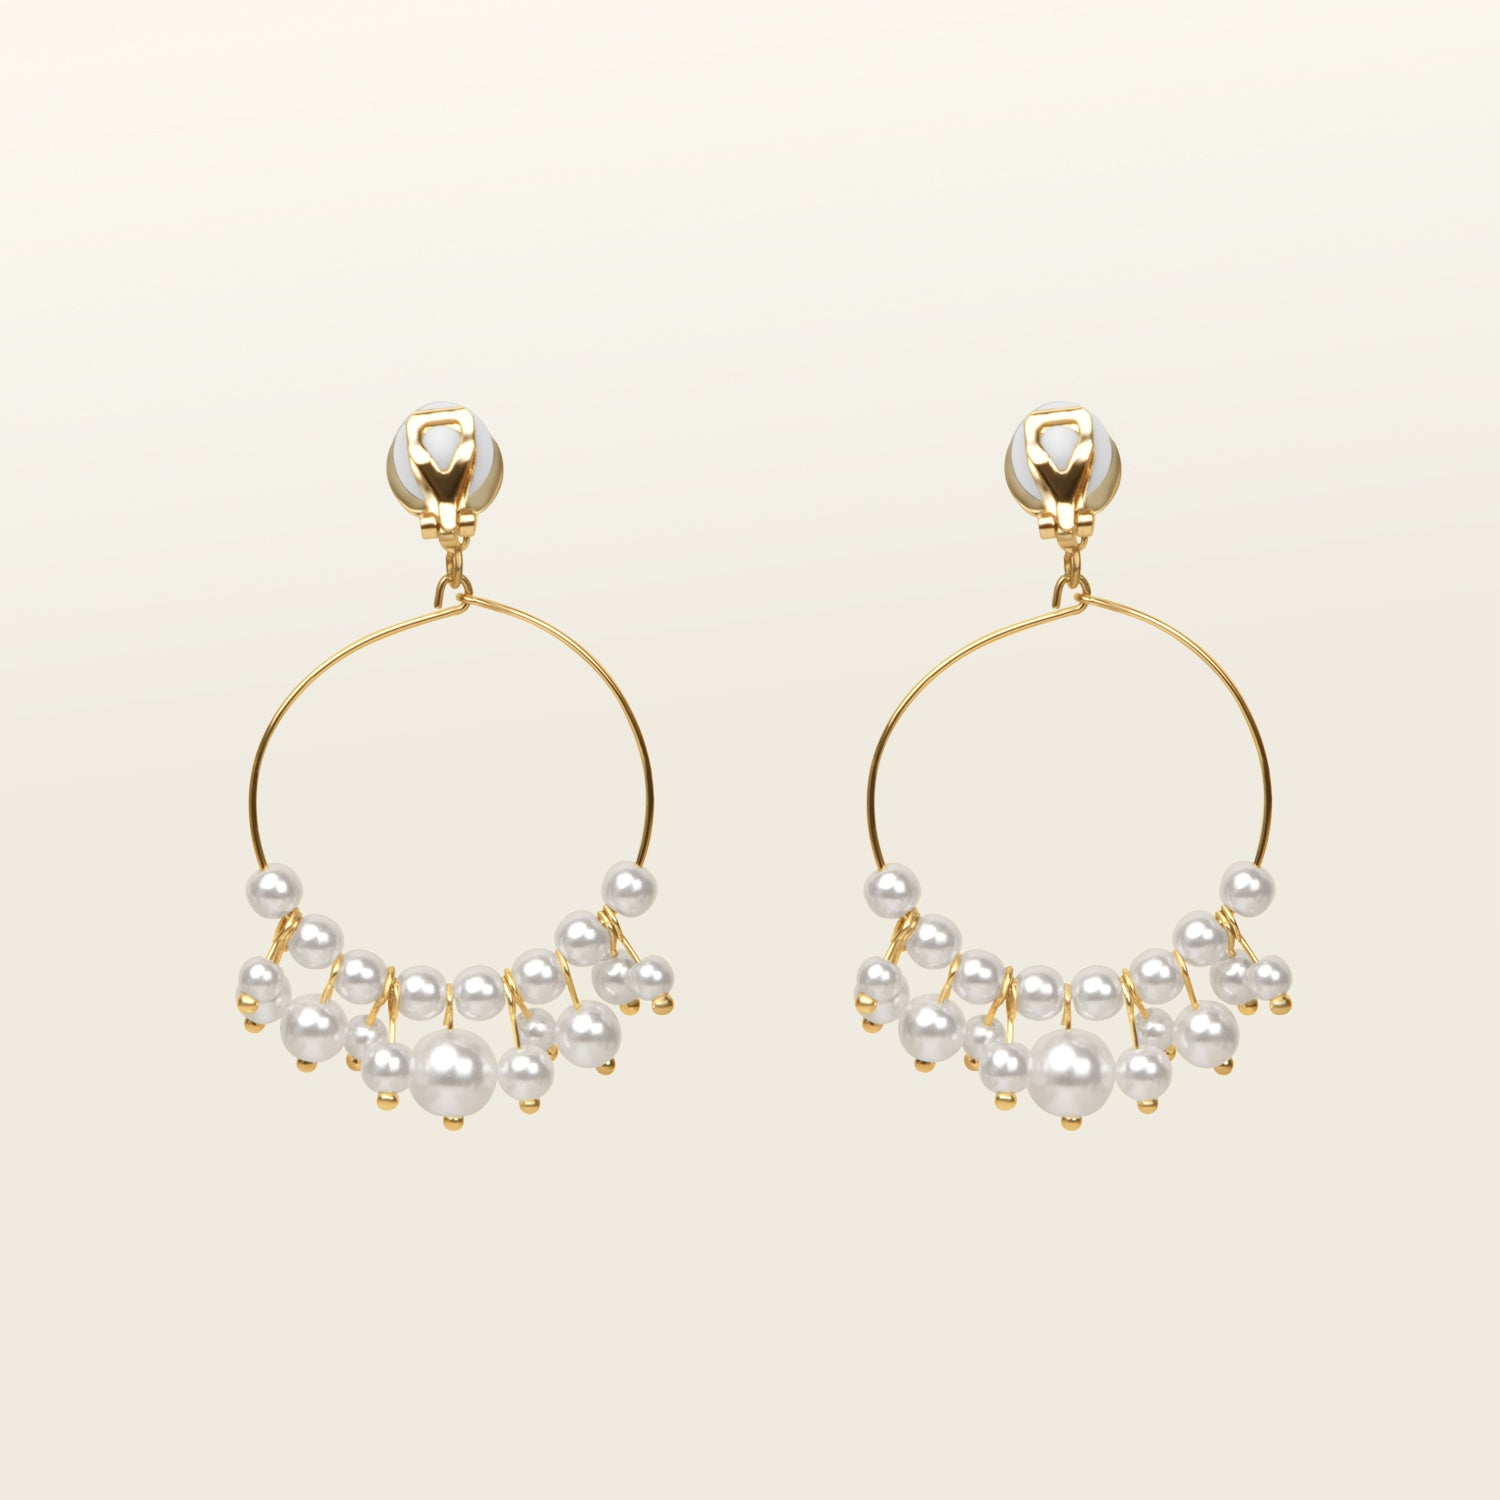 Image of the Delphine Clip On Earrings feature a gold-tone copper alloy and a Simulated Faux Pearl. The closure type is a padded clip-on earring with removable rubber padding, making it ideal for all ear types (including thick/large ears, sensitive ears, small/thin ears, and stretched/healing ears). You can expect a secure hold for up to 12 hours of comfortable wear. Please note that this item is sold as a single pair.